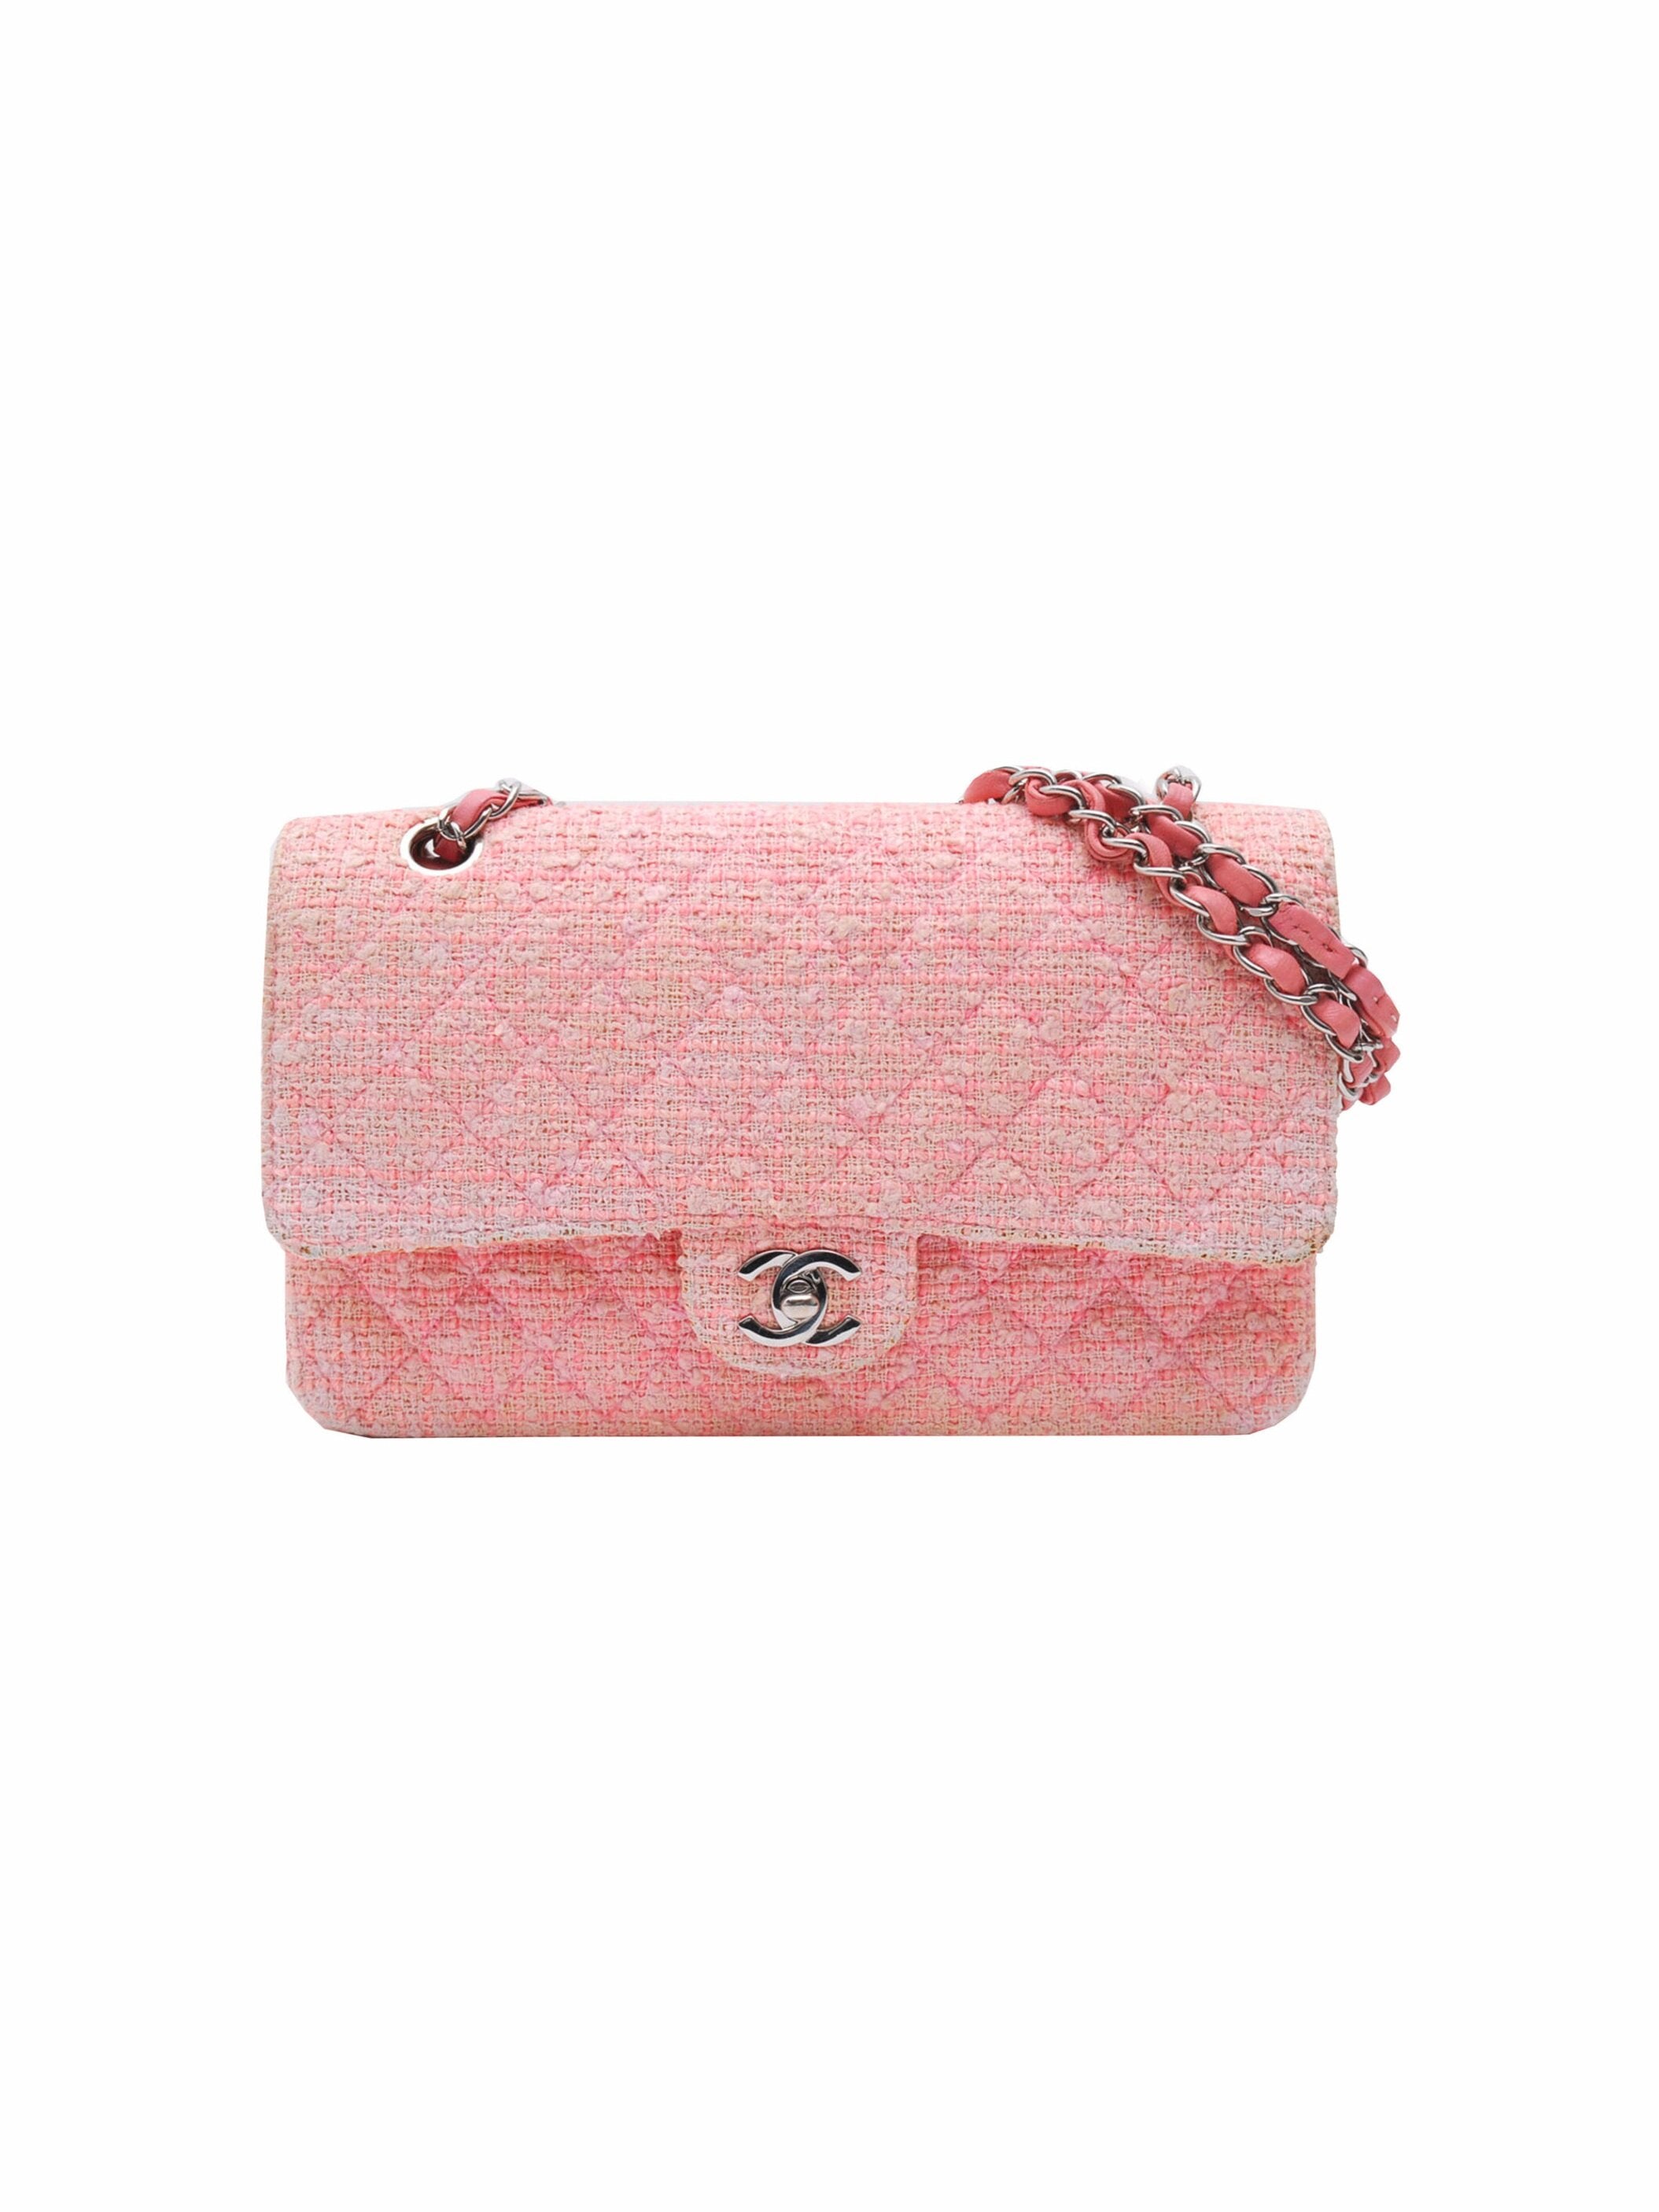 Chanel 2000s SS Rare Pink Tweed Flap